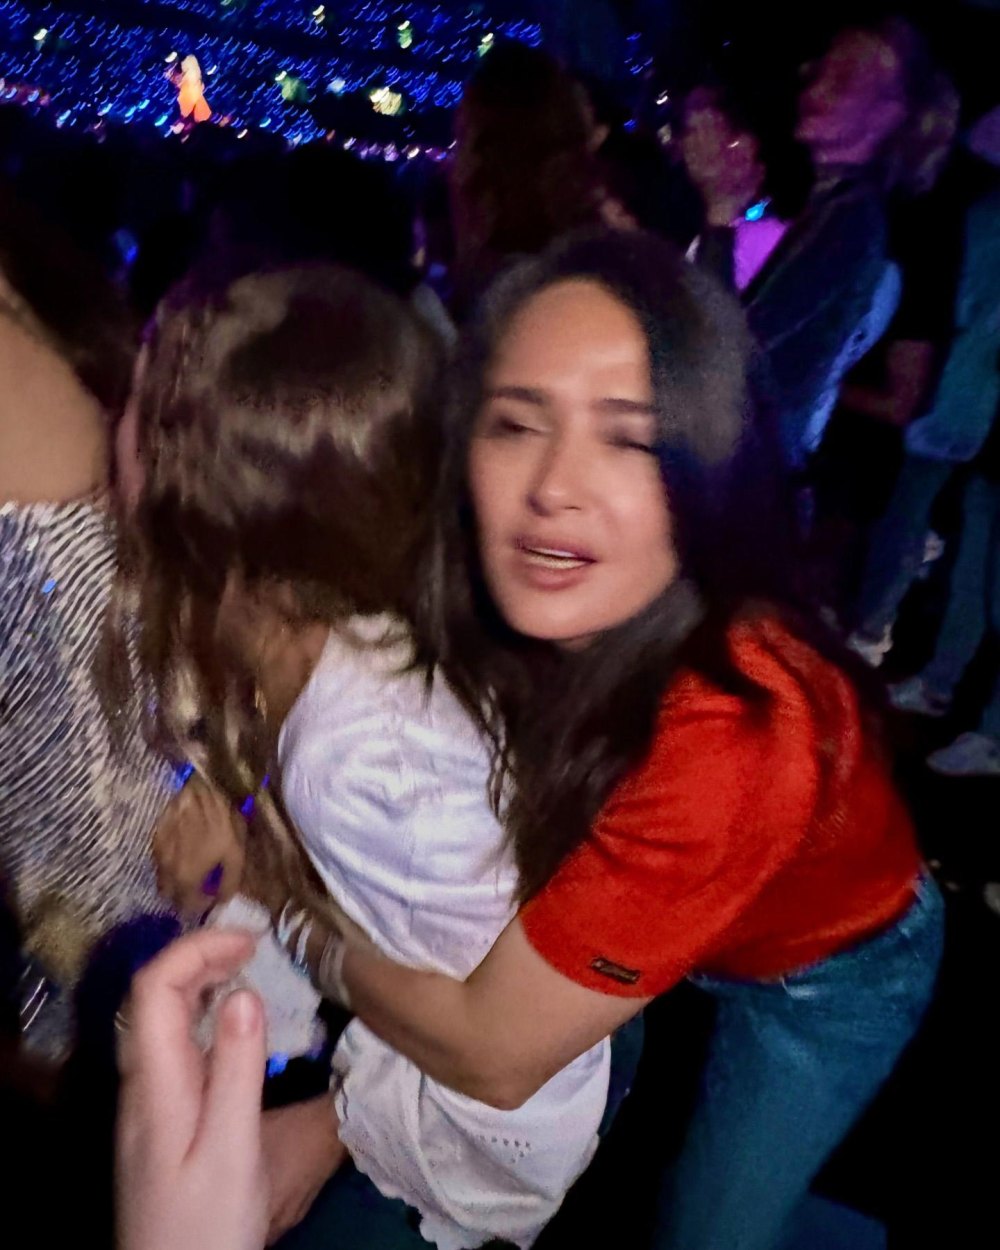 Salma Hayek Has The Best Day With Daughter Valentina at Taylor Swifts Eras Tour Show in London